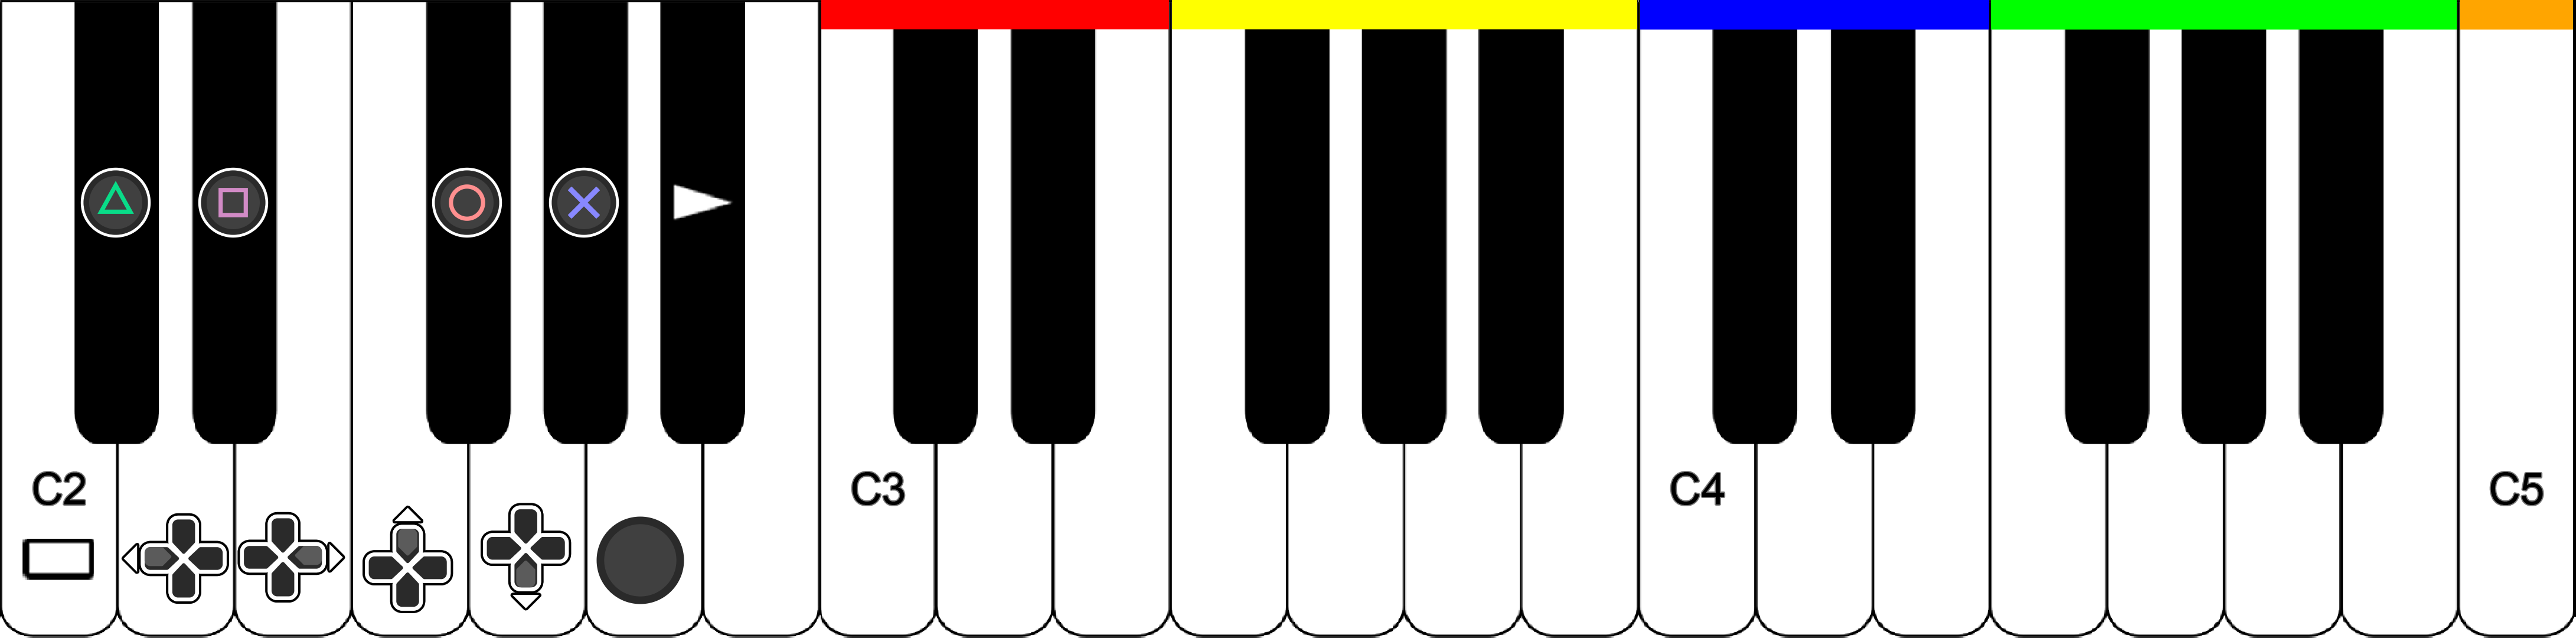 A picture of a 37 key keyboard, showing the second octave mapped to PlayStation buttons, C3 to E3 under a red color, F3 to B3 under a yellow color, C4 to E4 under a blue color, F4 to B4 under a green color, and C5 under an orange color.